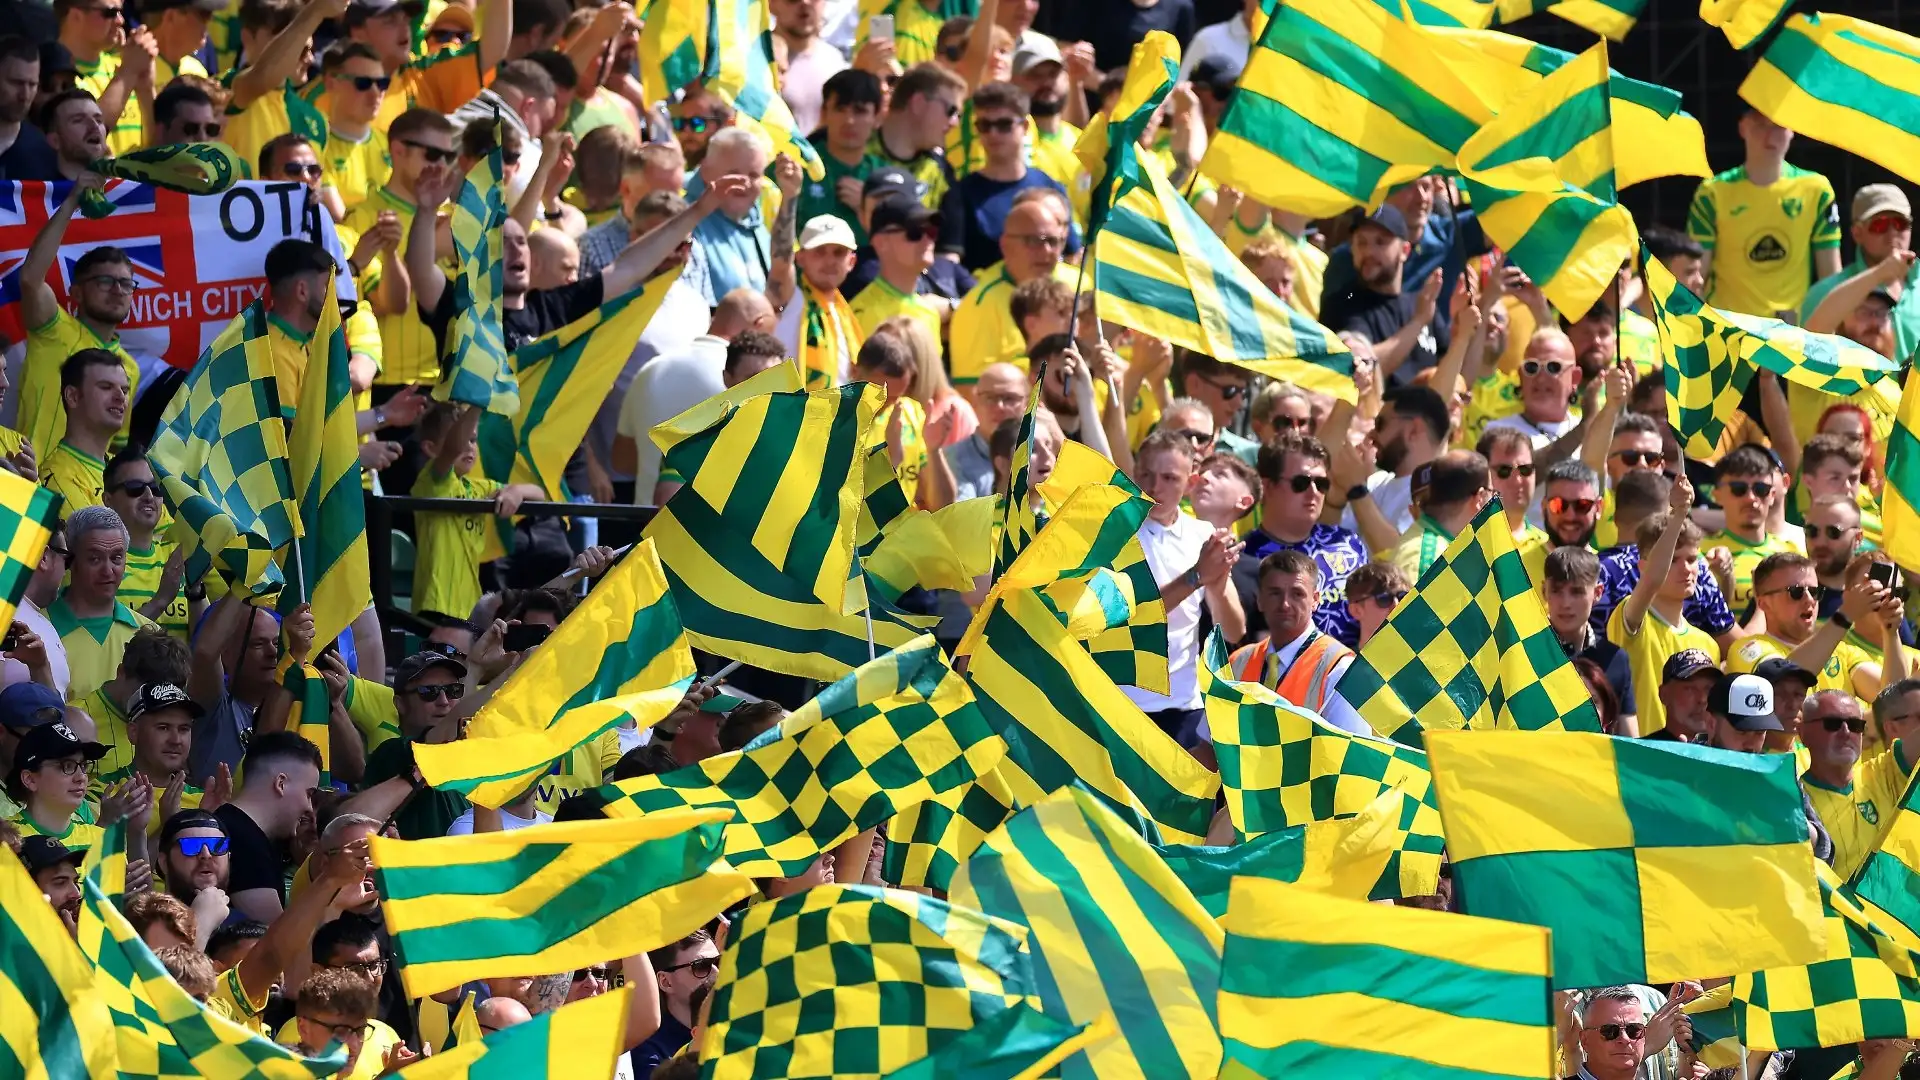 Two fans arrested after Leeds United supporter is 'slashed' outside Carrow Road following play-off clash with Norwich City